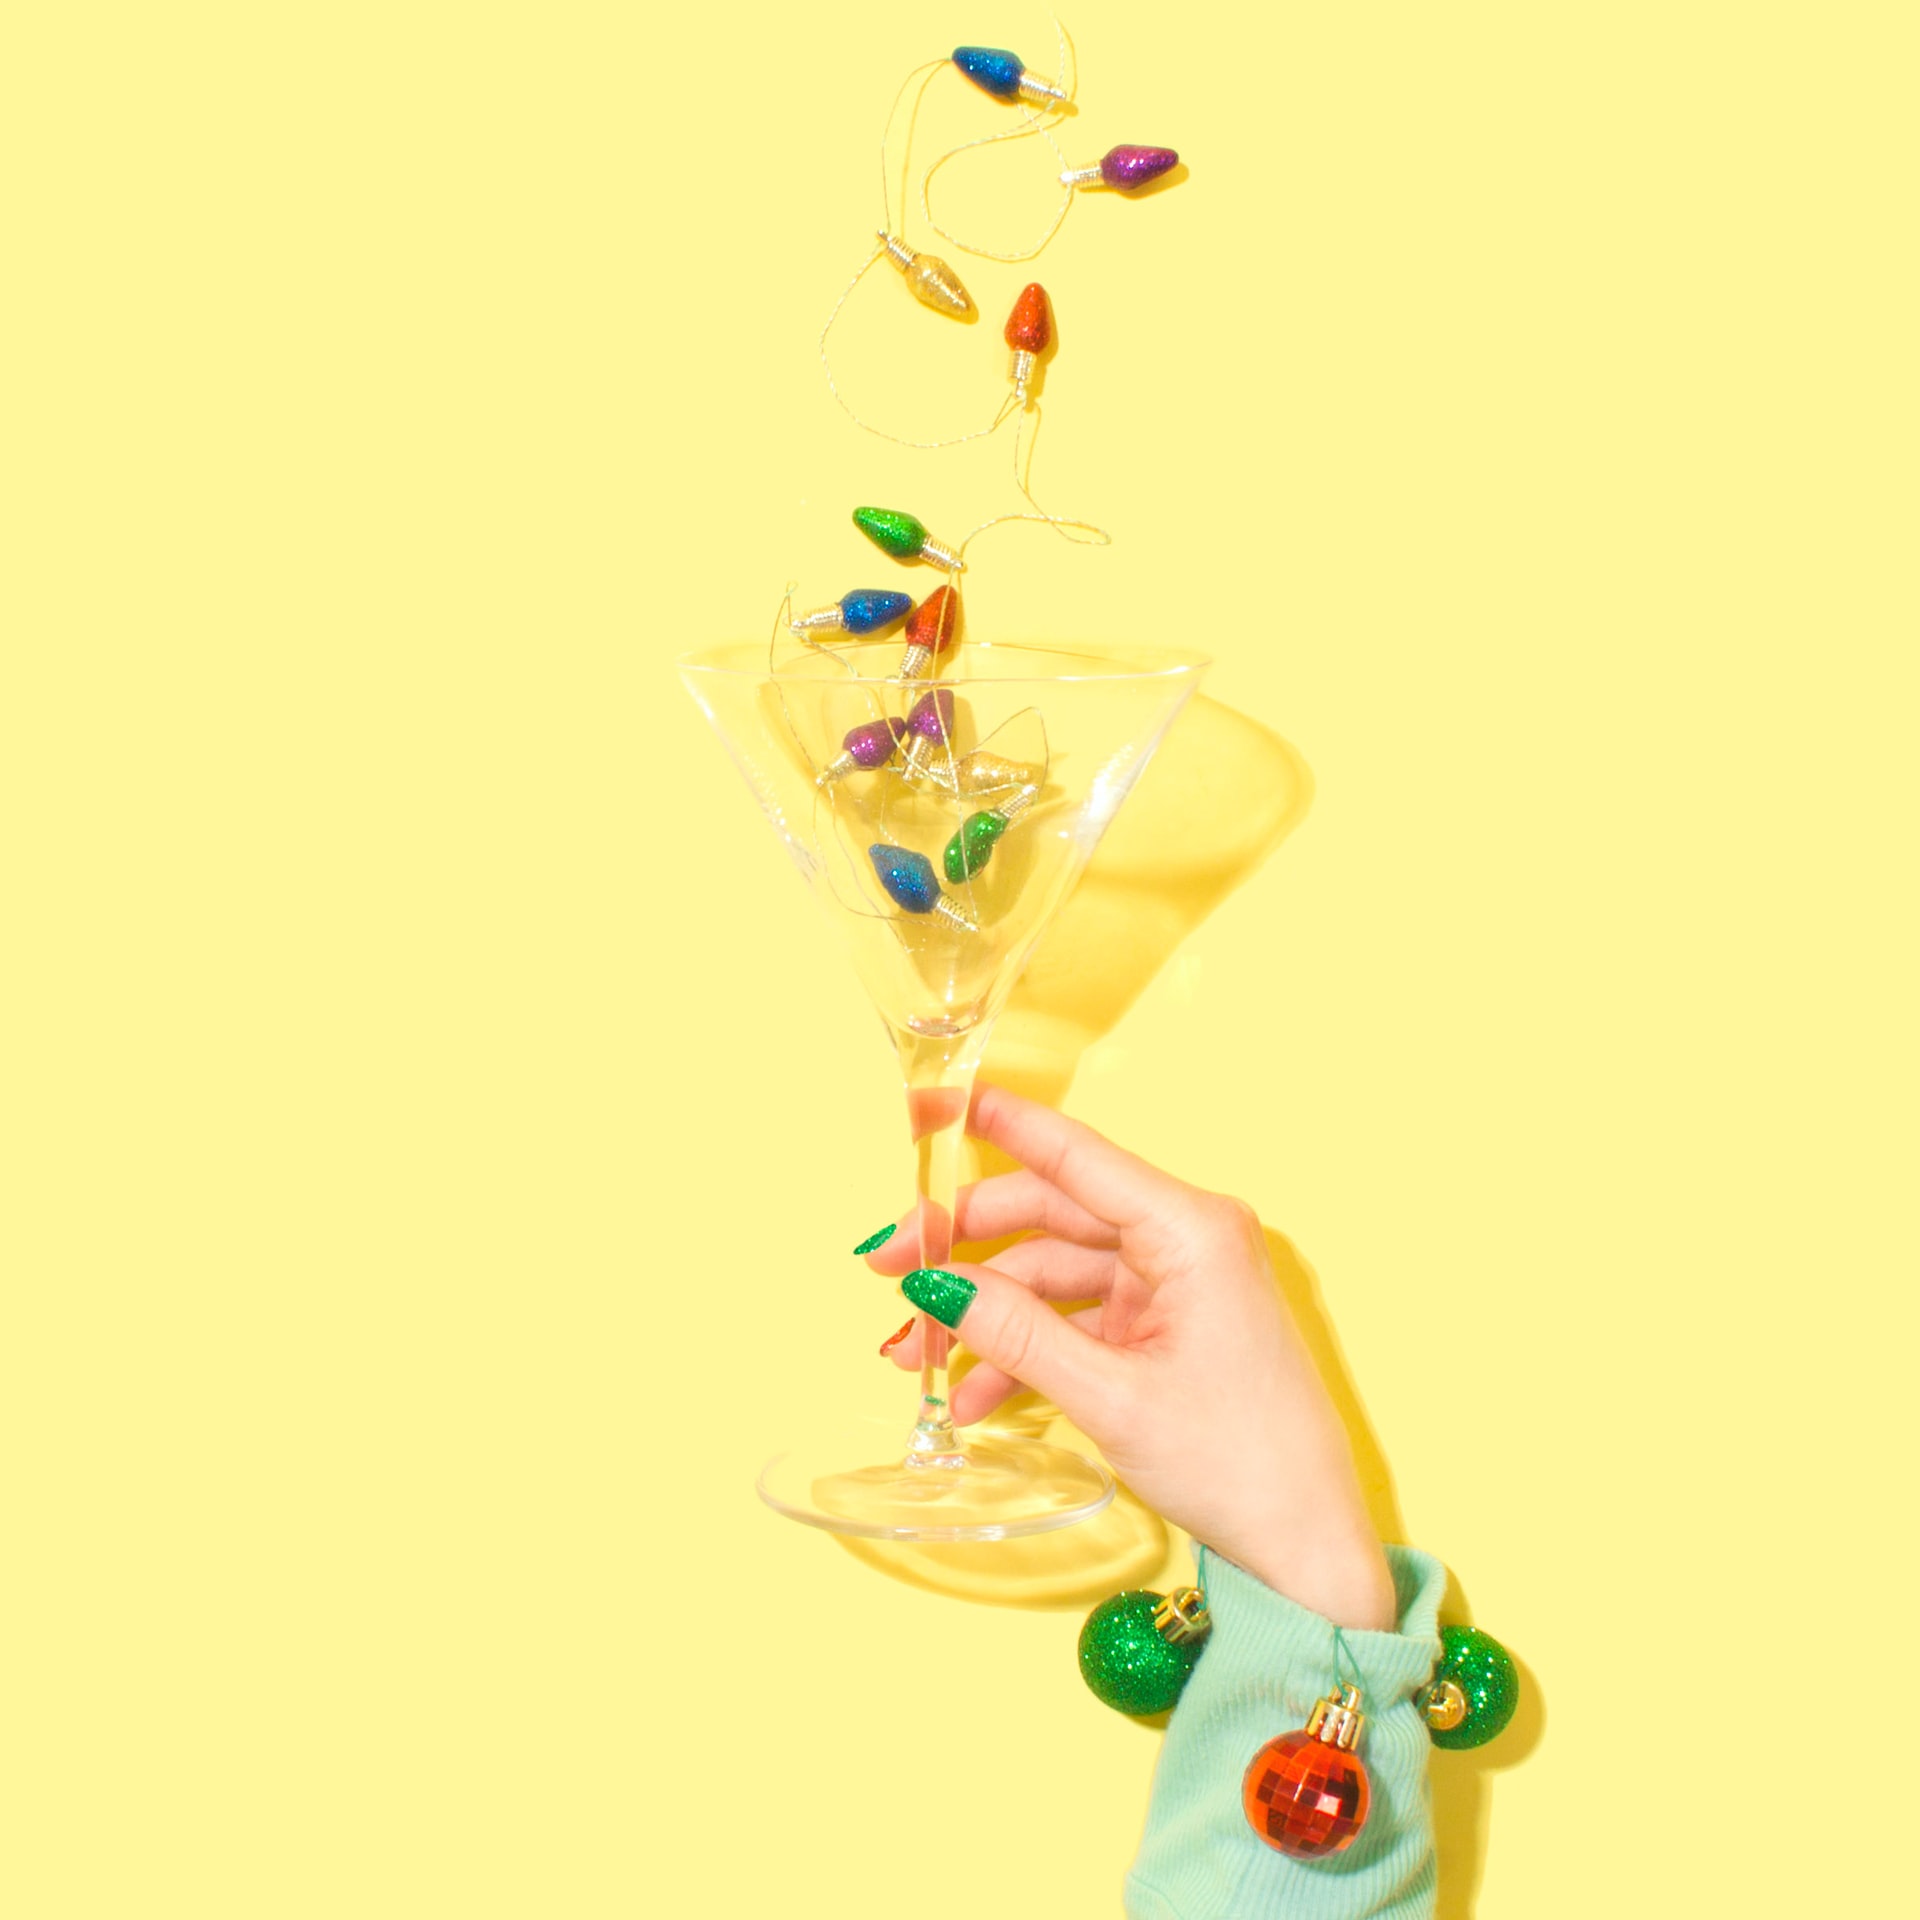 A hand with an ornament bracelet holds a martini glass filled with colorful Christmas lights against a bright yellow background.